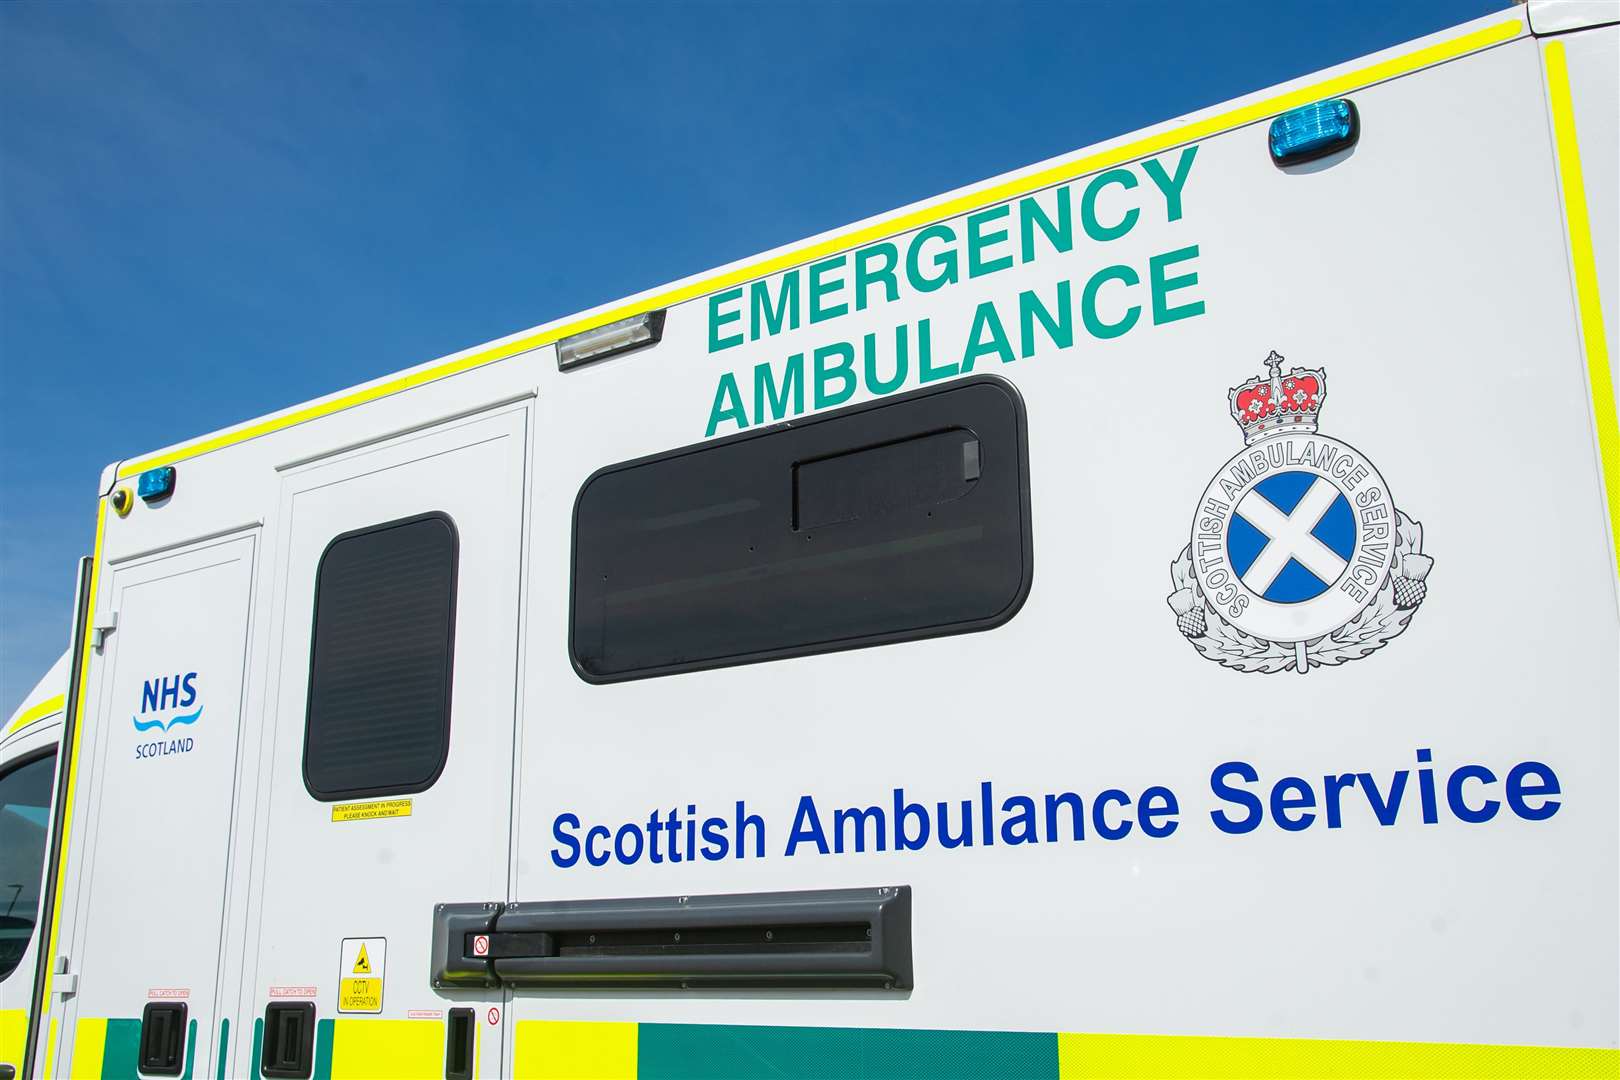 New provisions will see Ambulance staff recruited for roles in Aberdeen and Keith